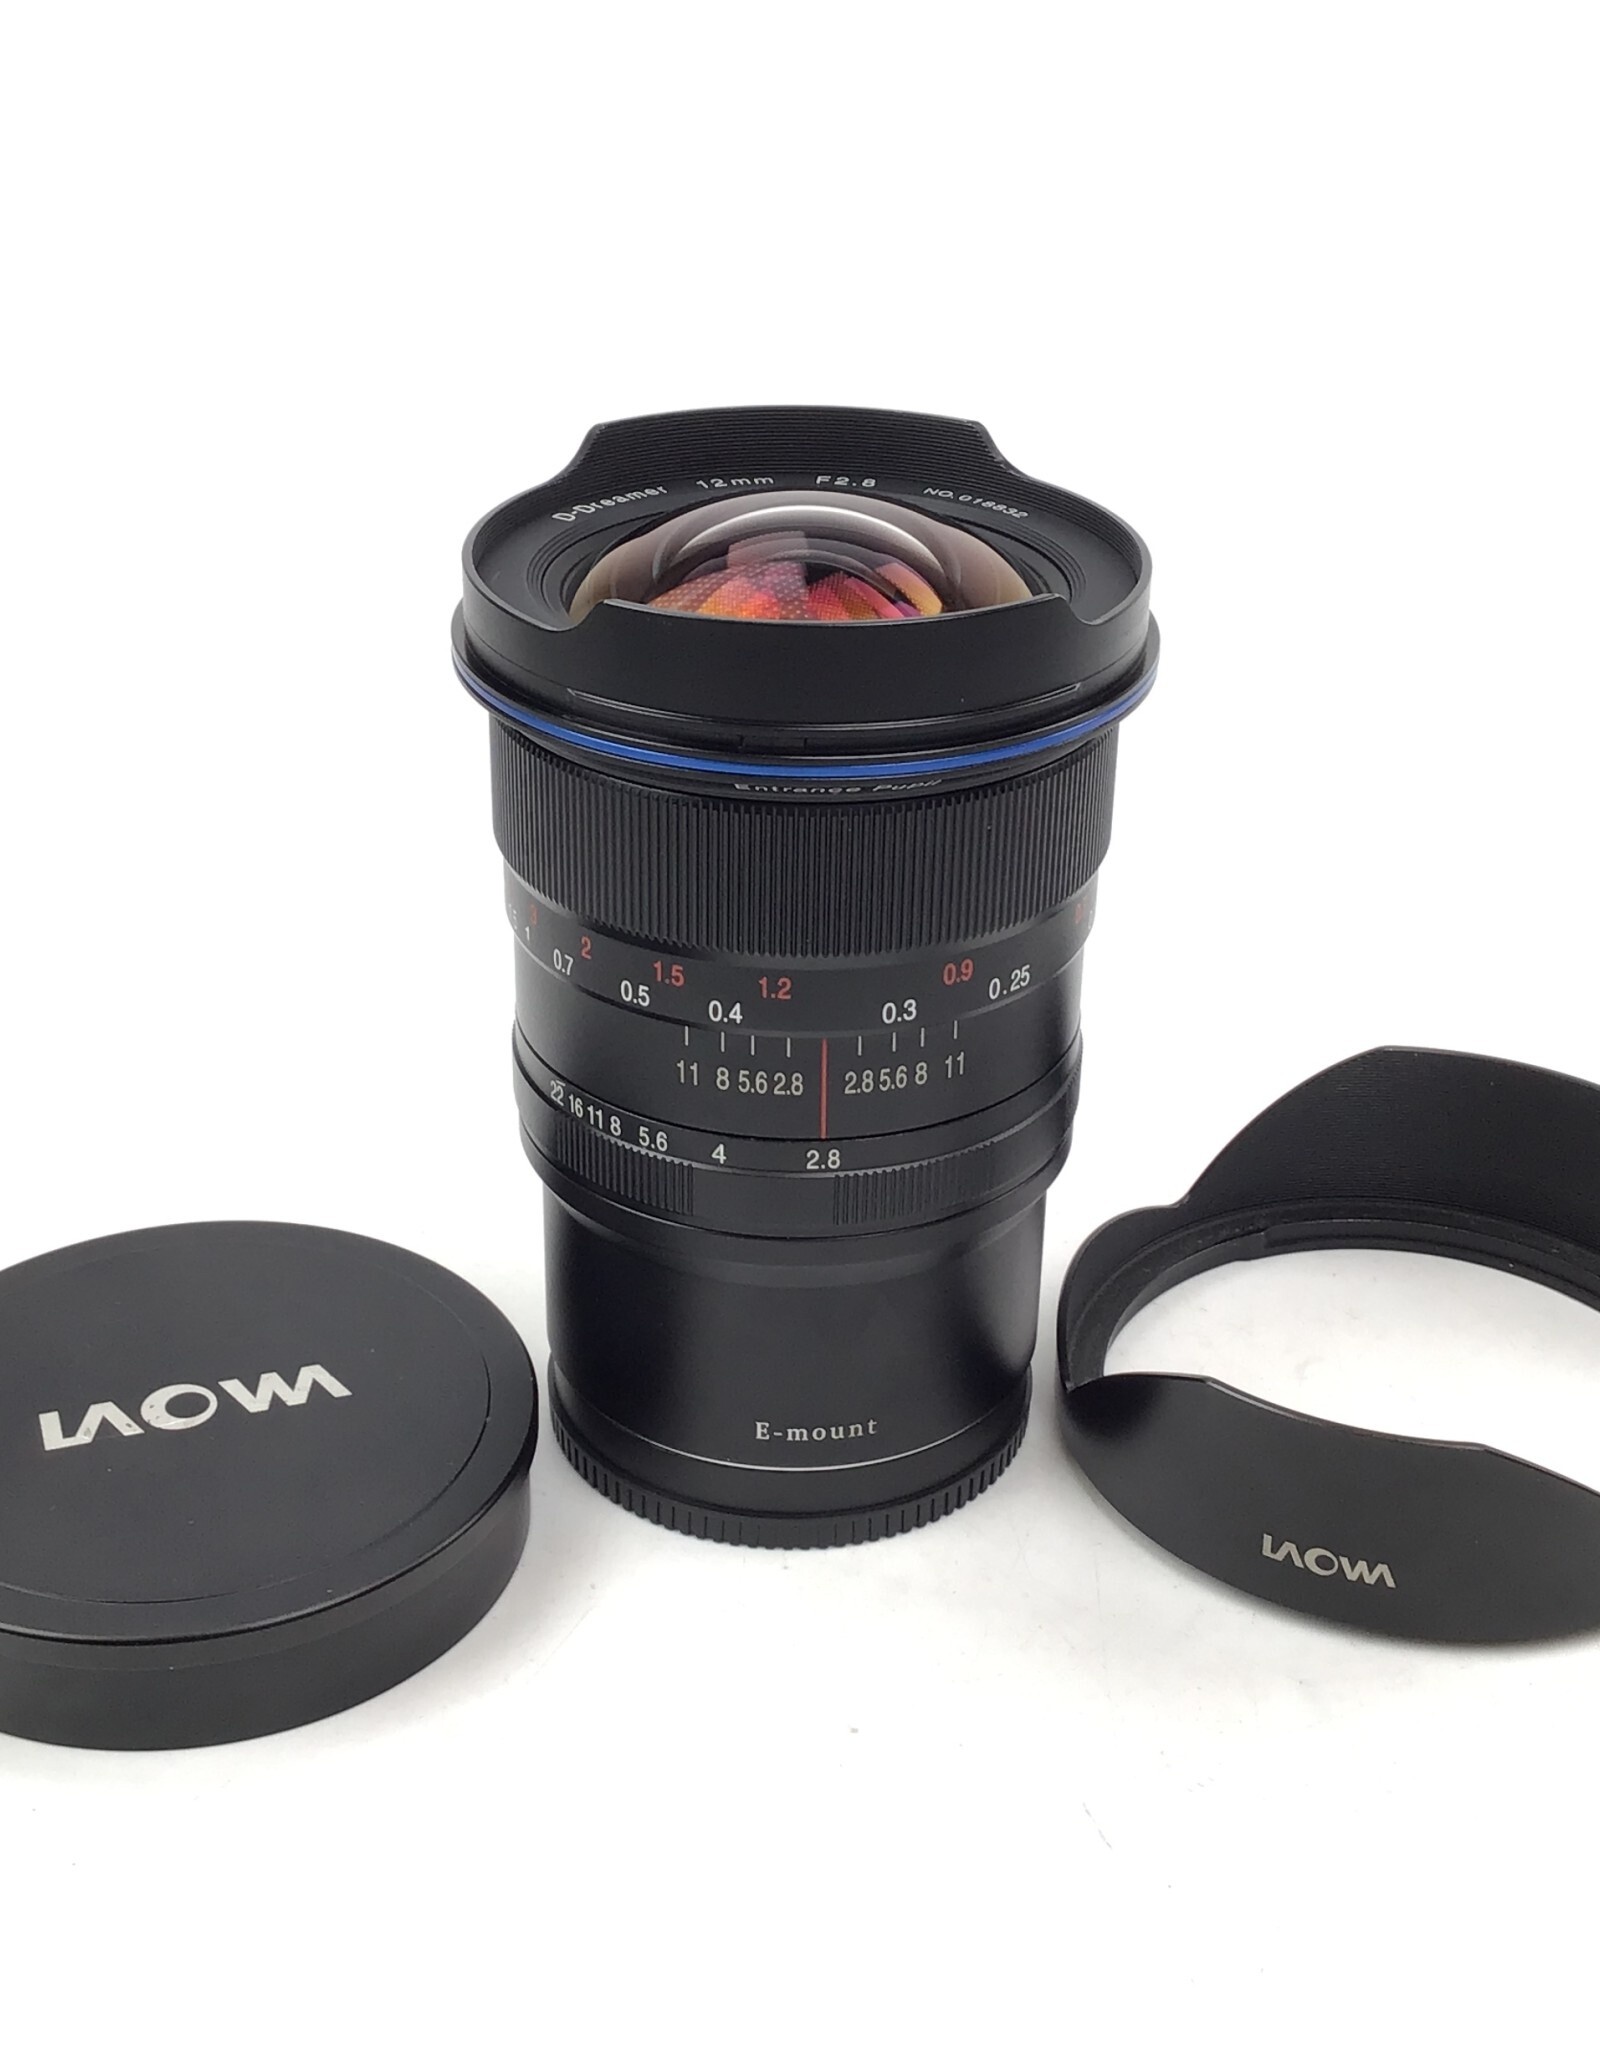 Laowa Dreamer 12mm f2.8 Lens for Sony Used Good